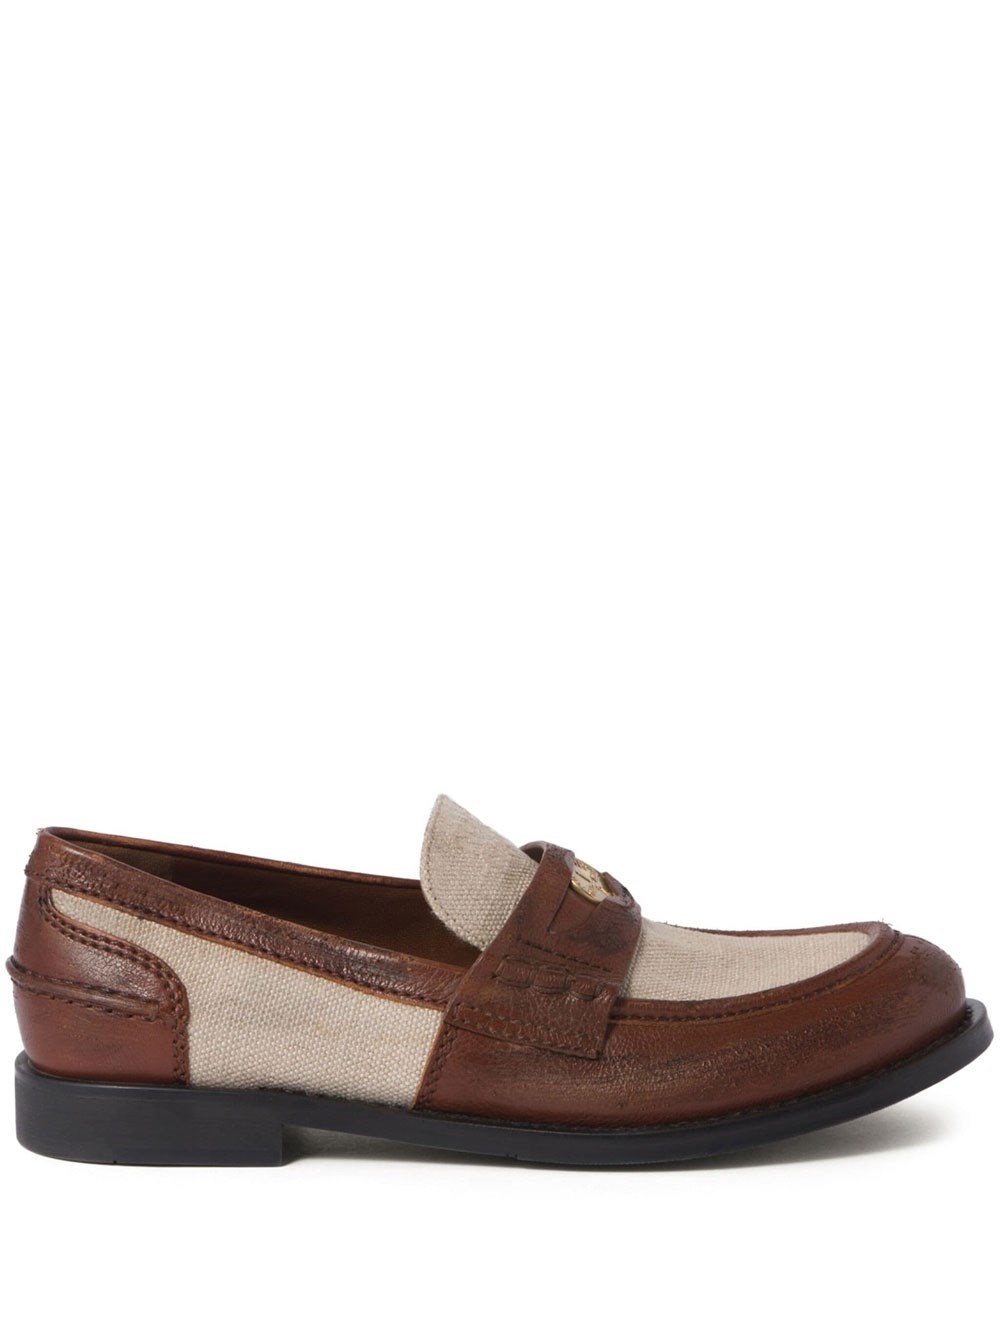 Miu Miu Leather And Linen Loafers In Brown